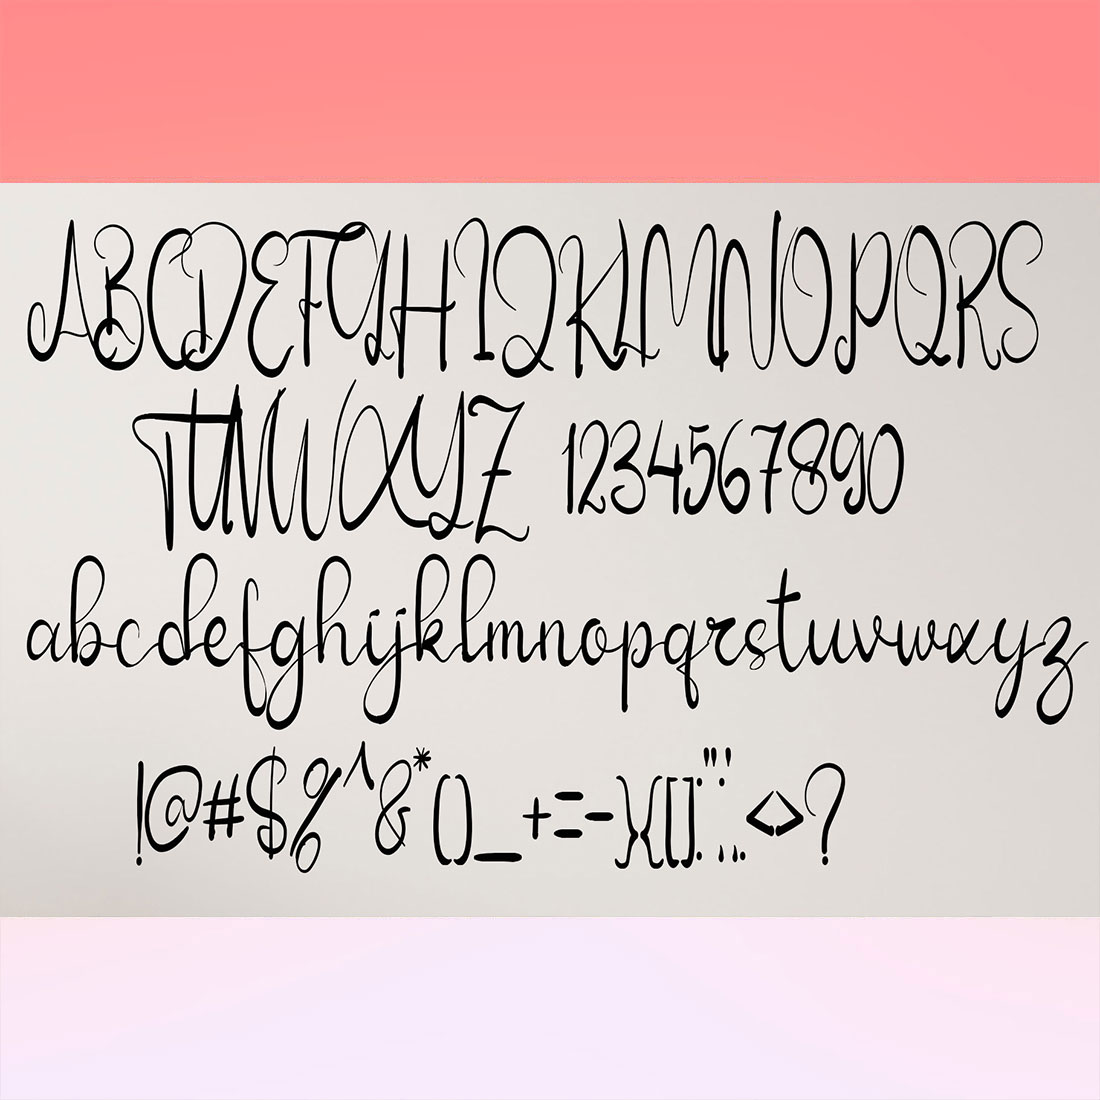 Black and white type of handwriting on a pink and white background.